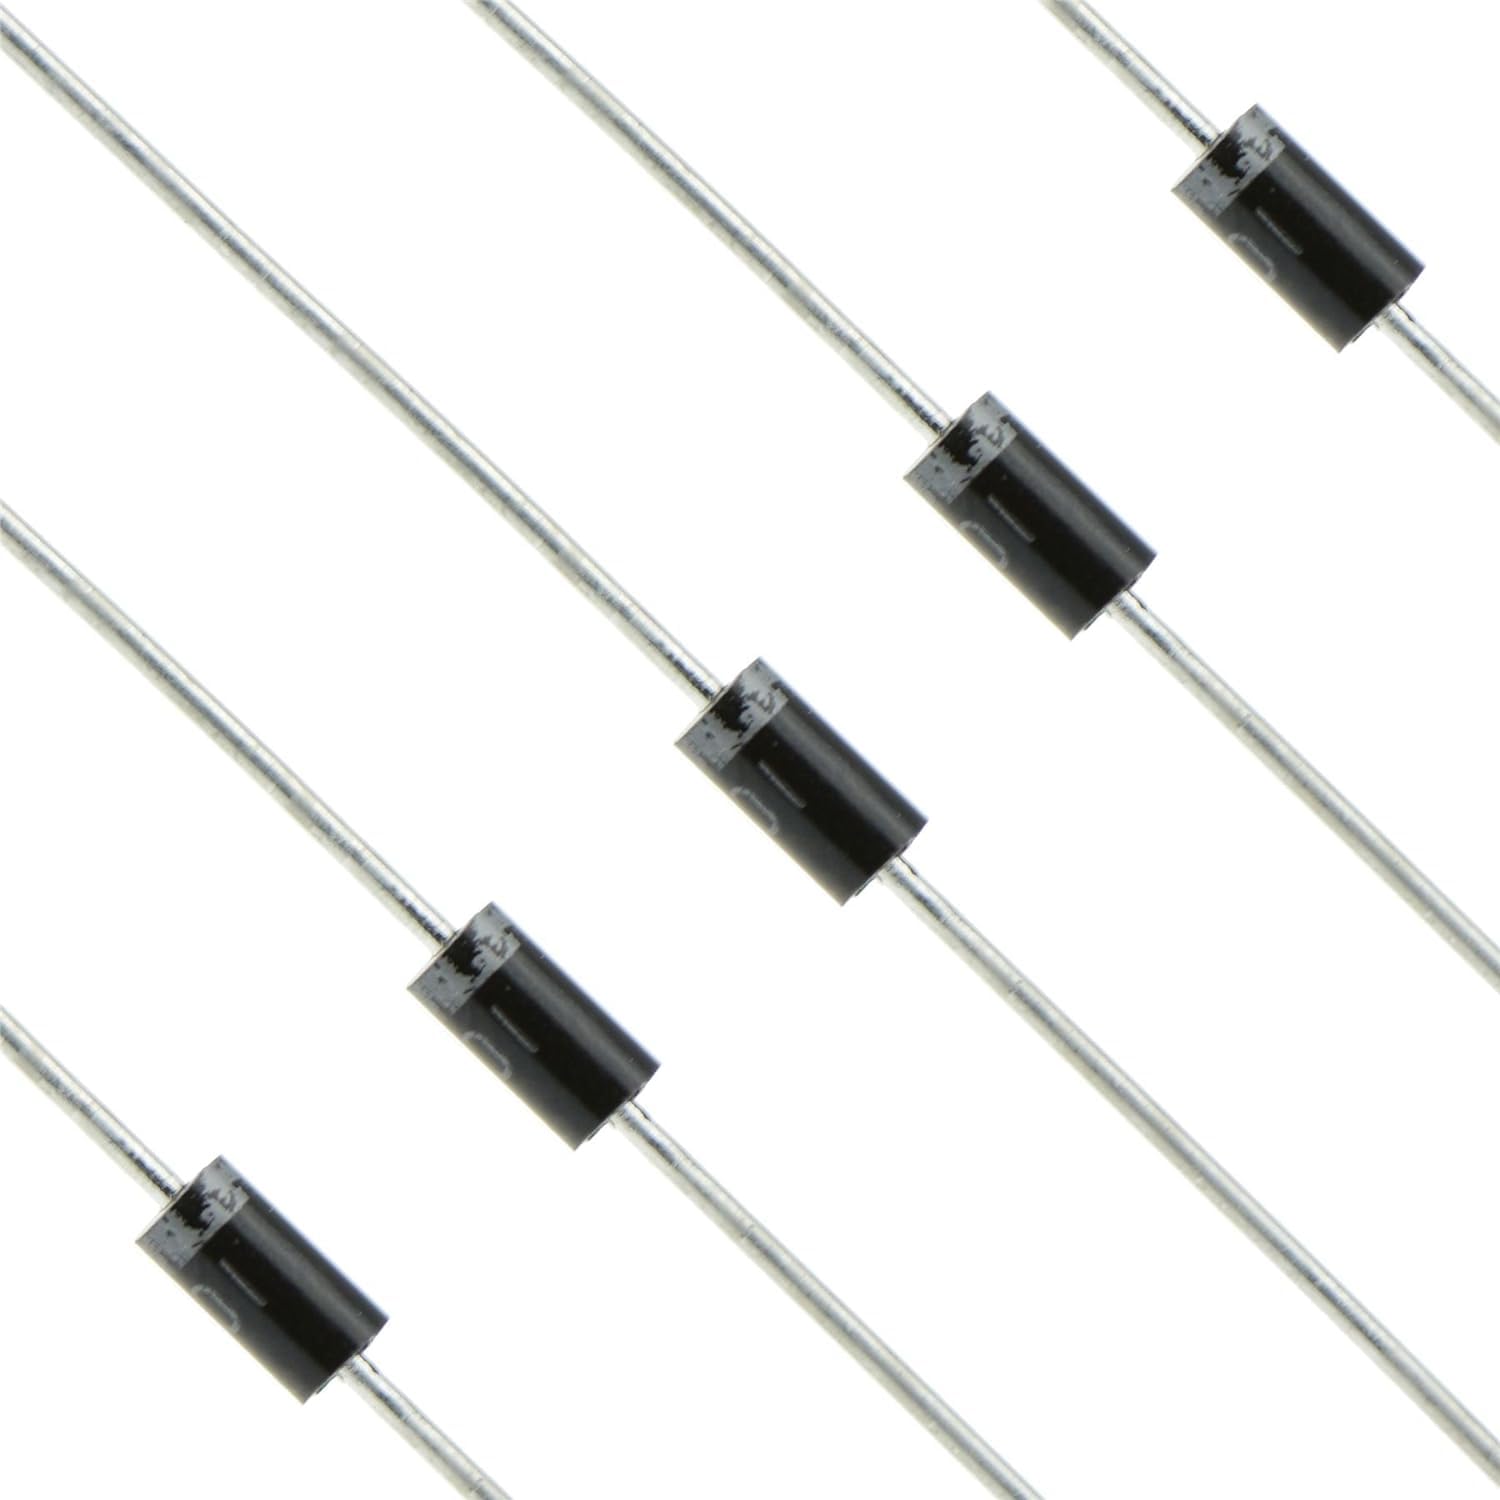 50 x 1N5817 1A 20V Schottky Rectifier Diode (Pack of 50)